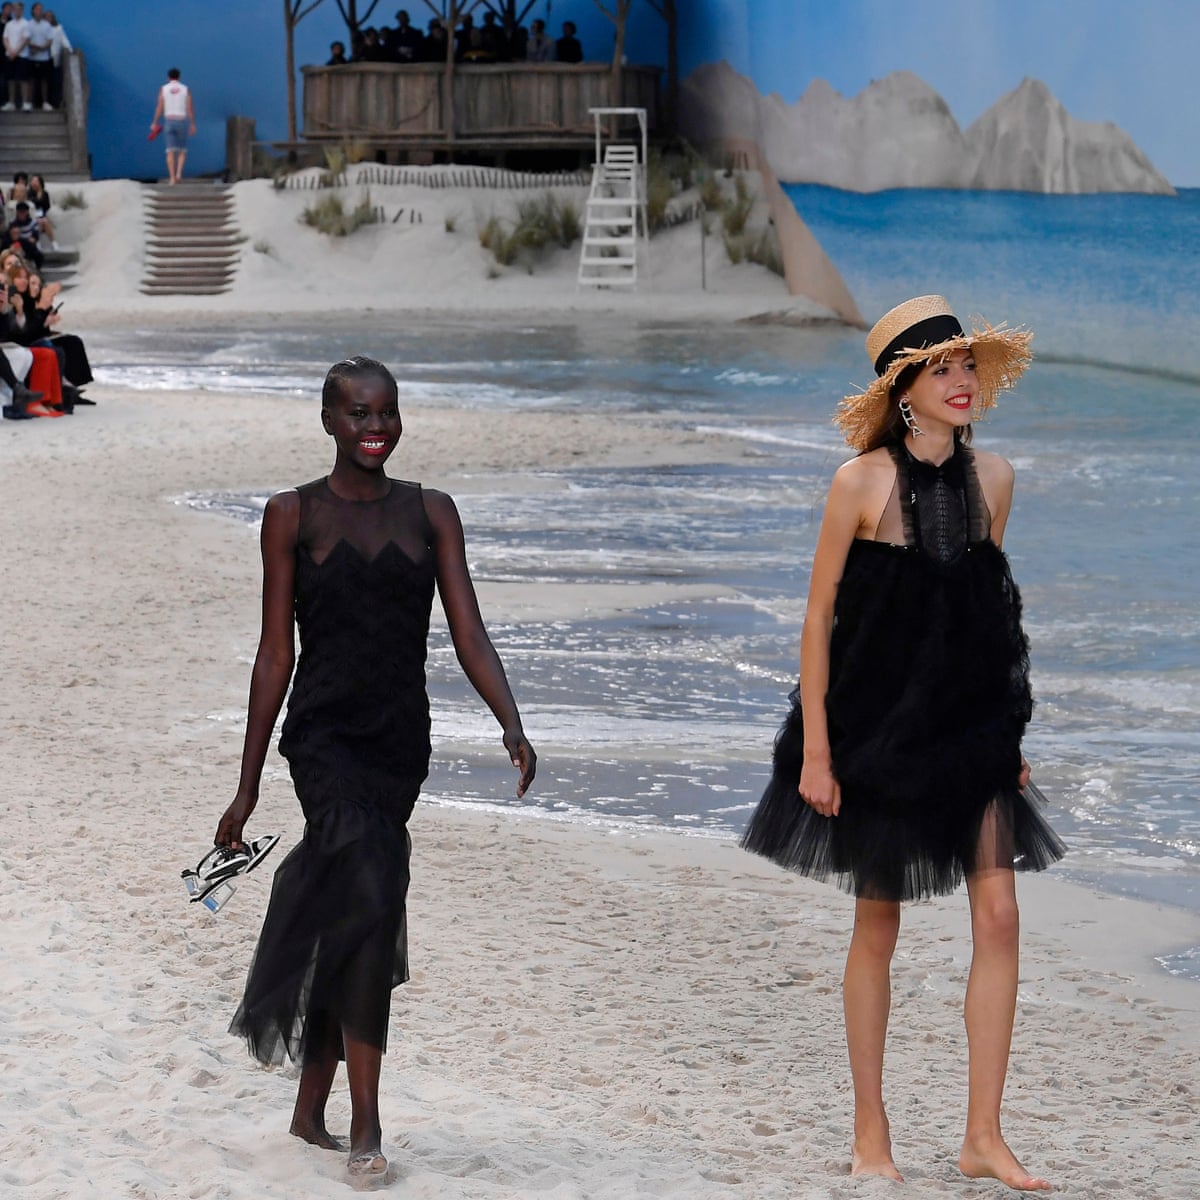 Karl Lagerfeld makes waves with catwalk beach at Chanel show, Chanel